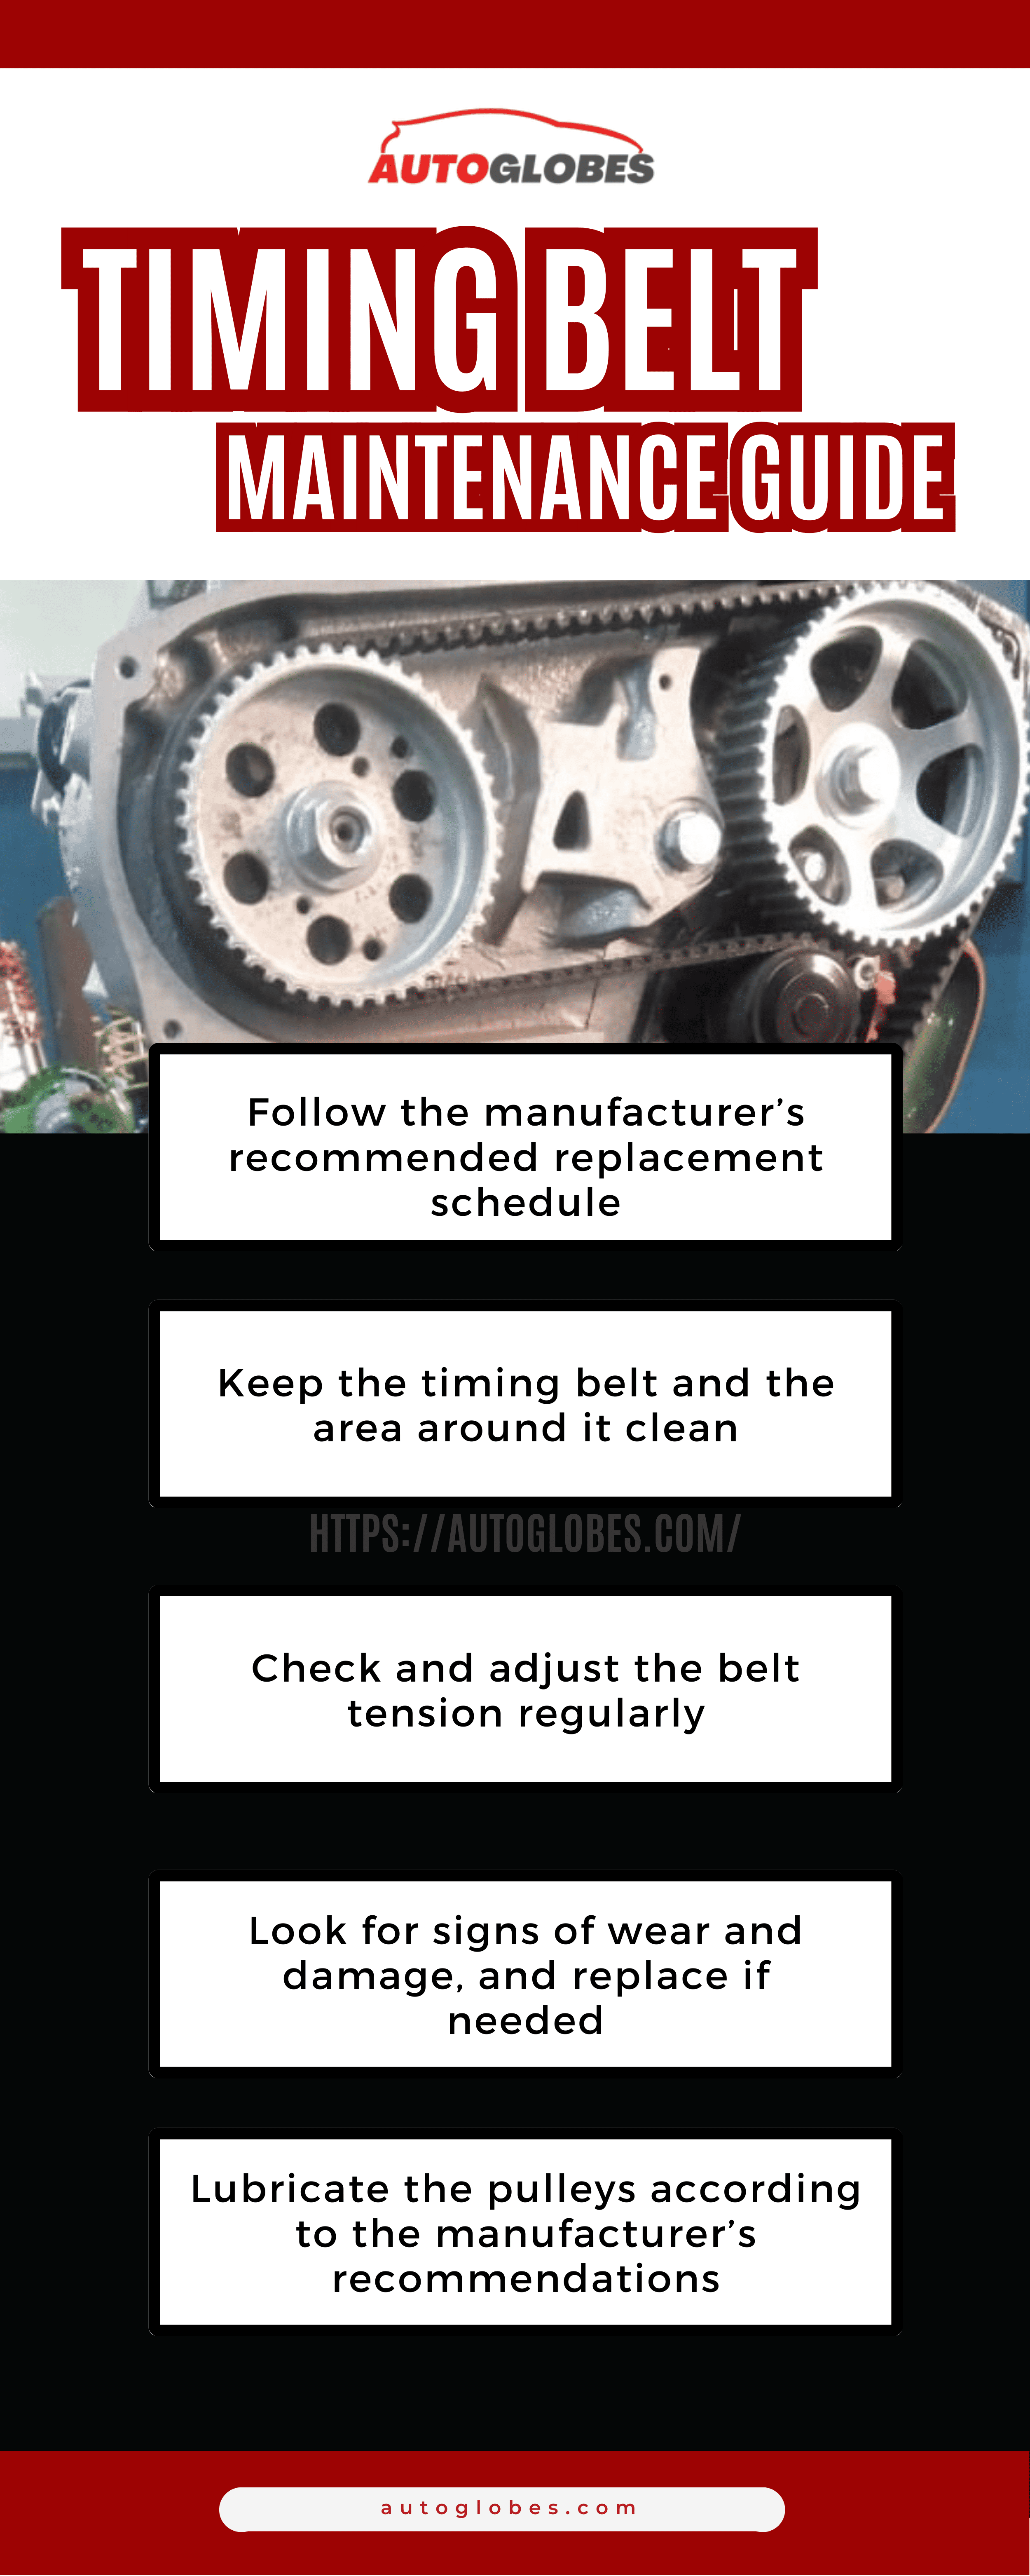 Timing Belt Maintenance Guide Infographic